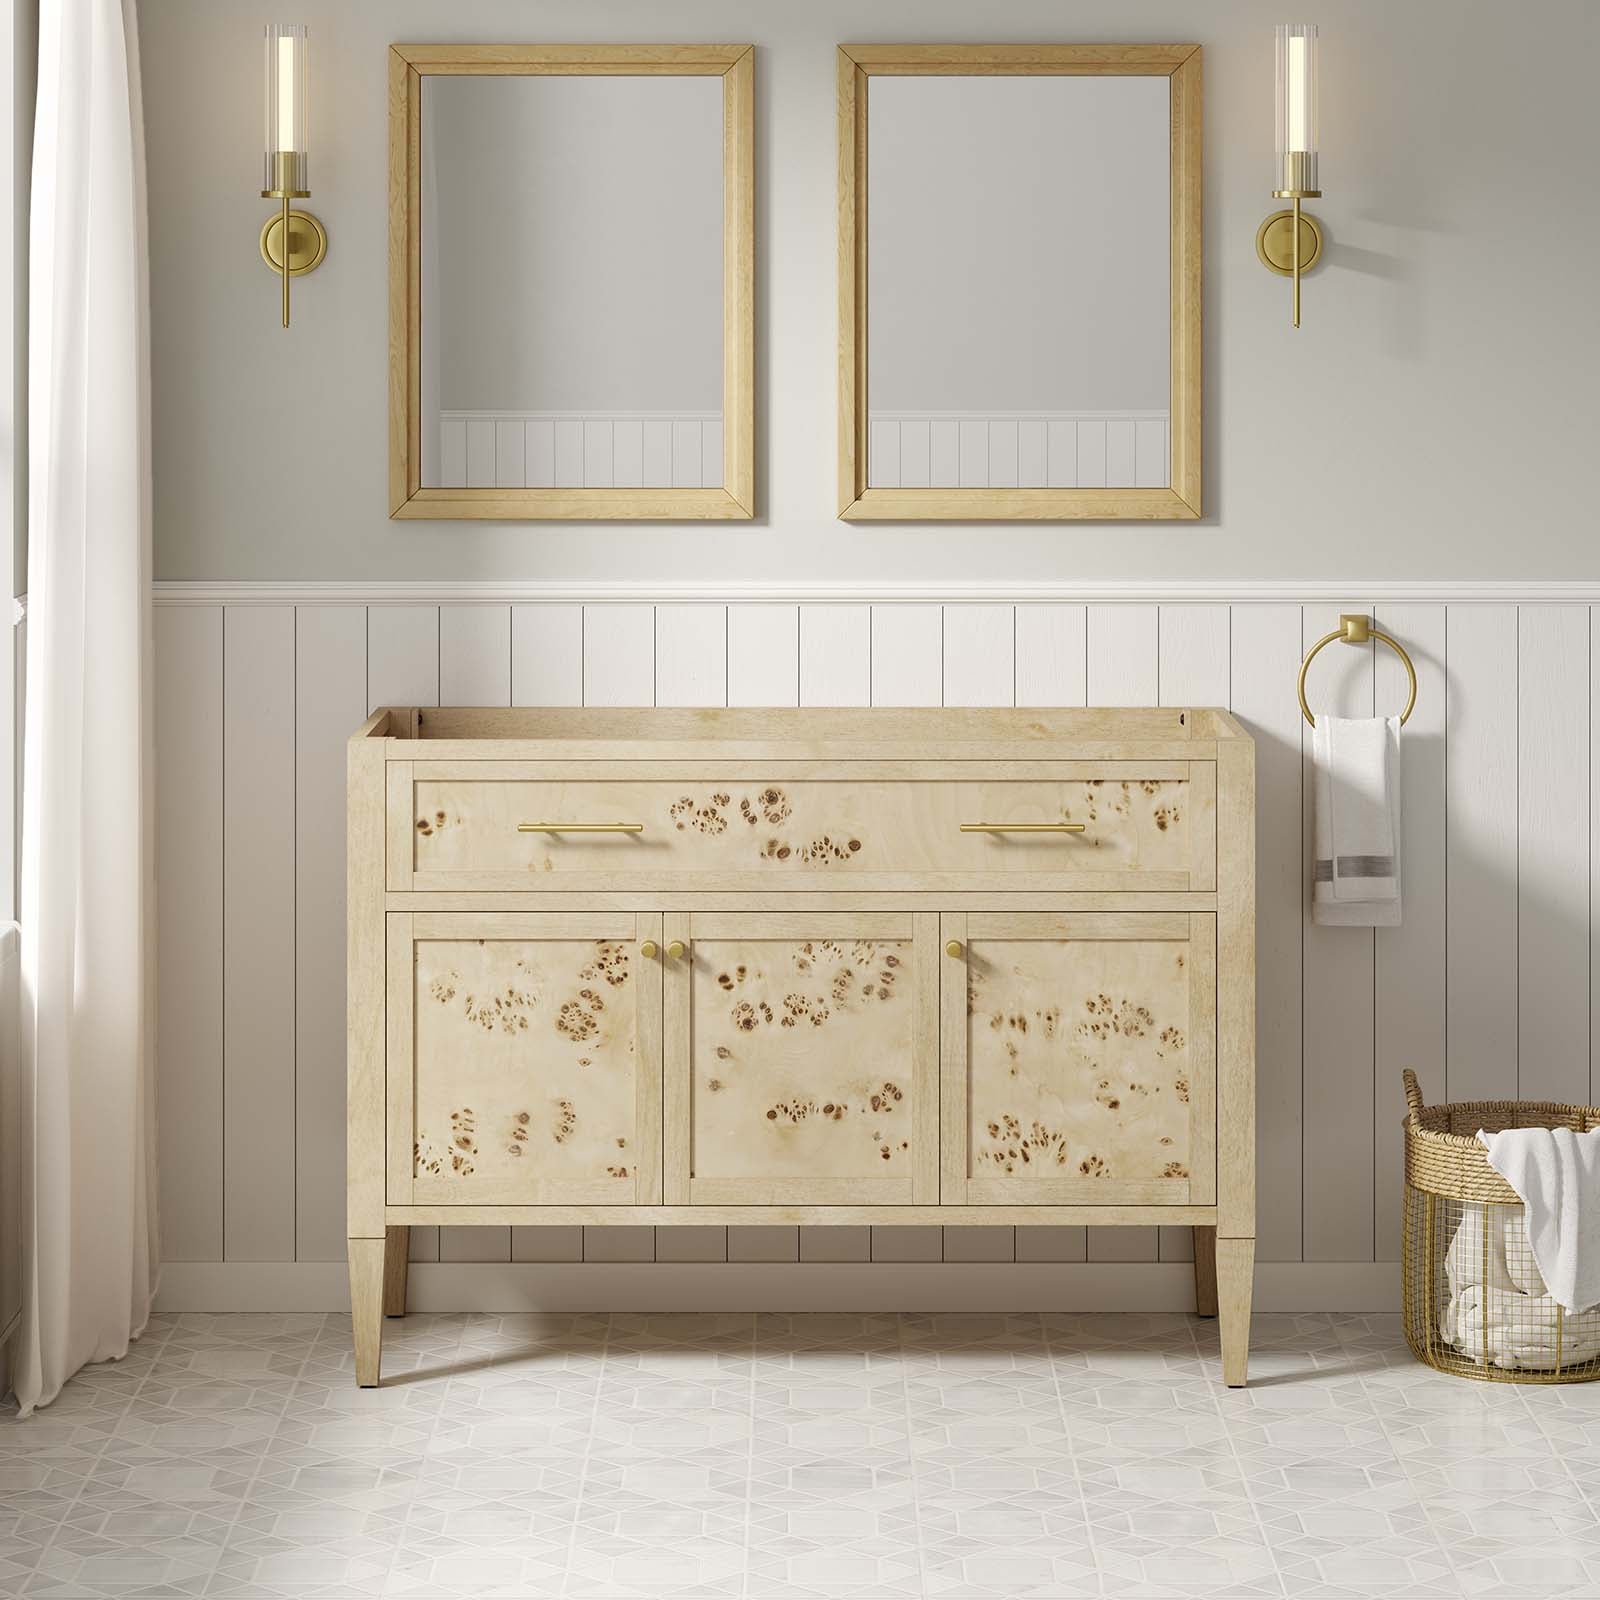 Elysian 48" Wood Bathroom Vanity Cabinet (Sink Basin Not Included) By Modway - EEI-6140 | Bathroom Accessories | Modway - 11